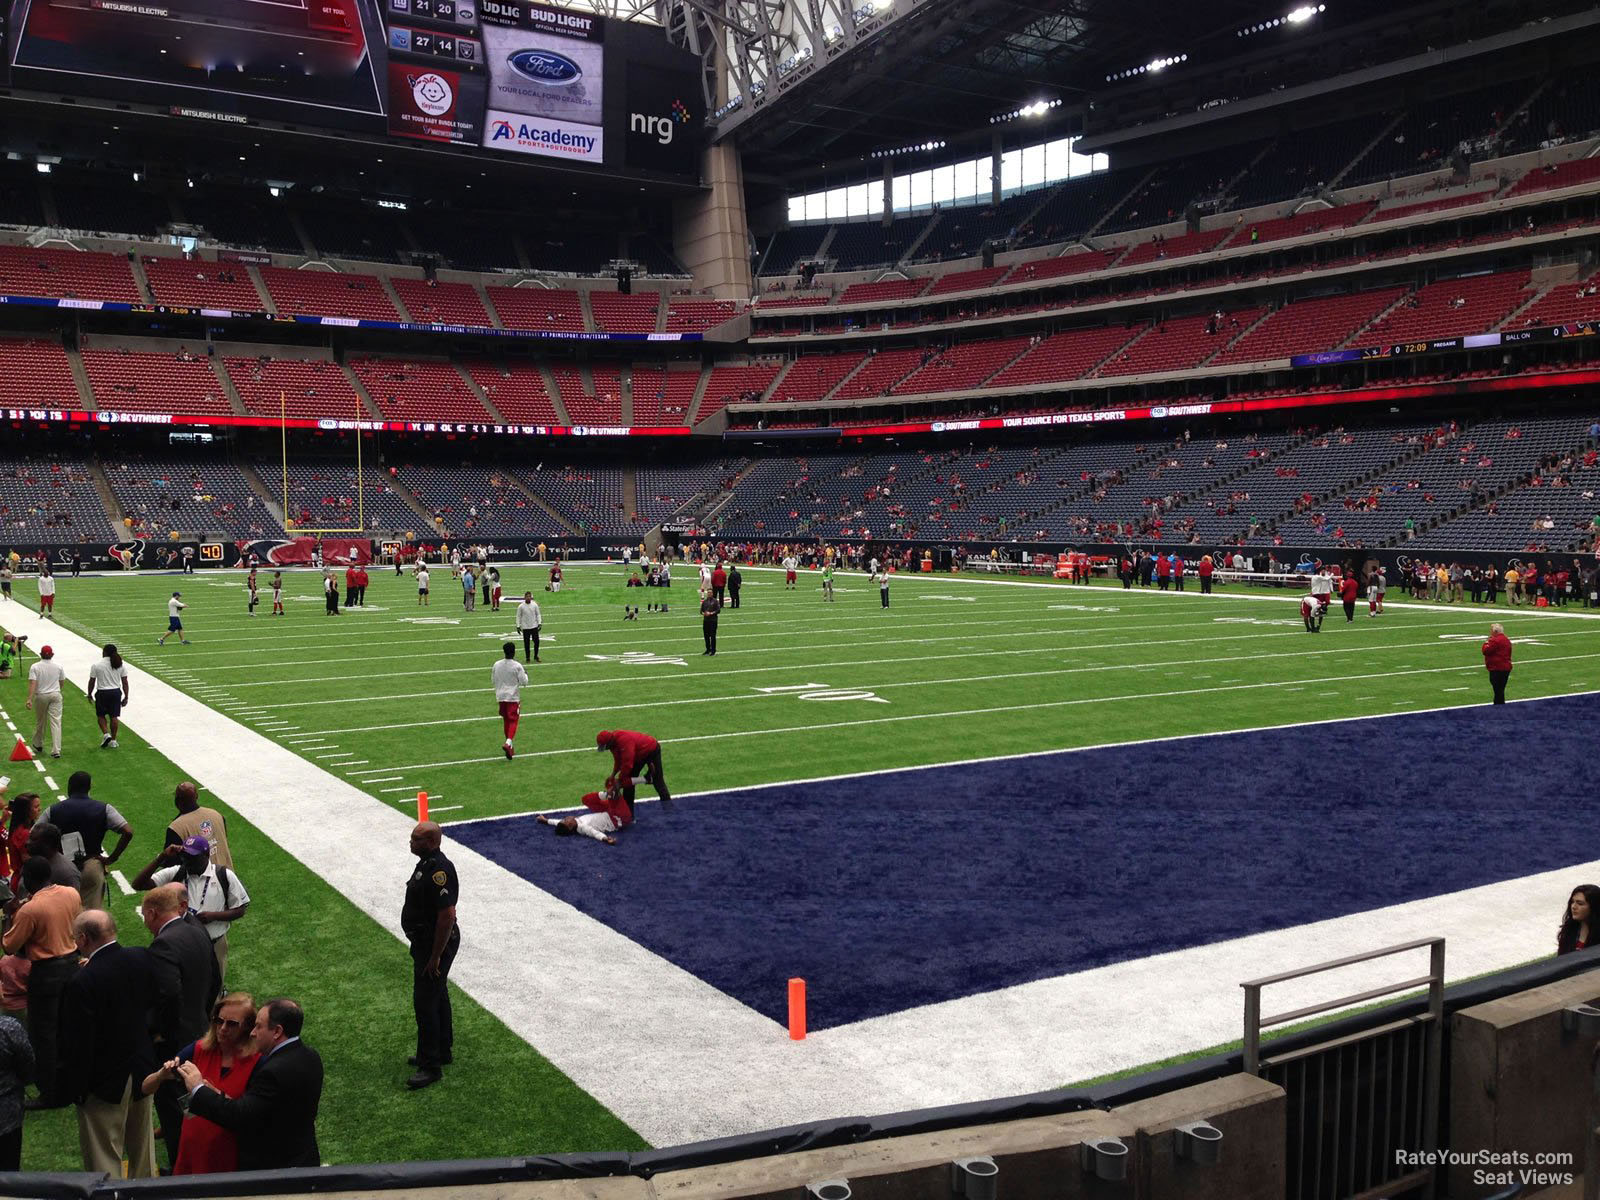 section 139, row c seat view  for football - nrg stadium